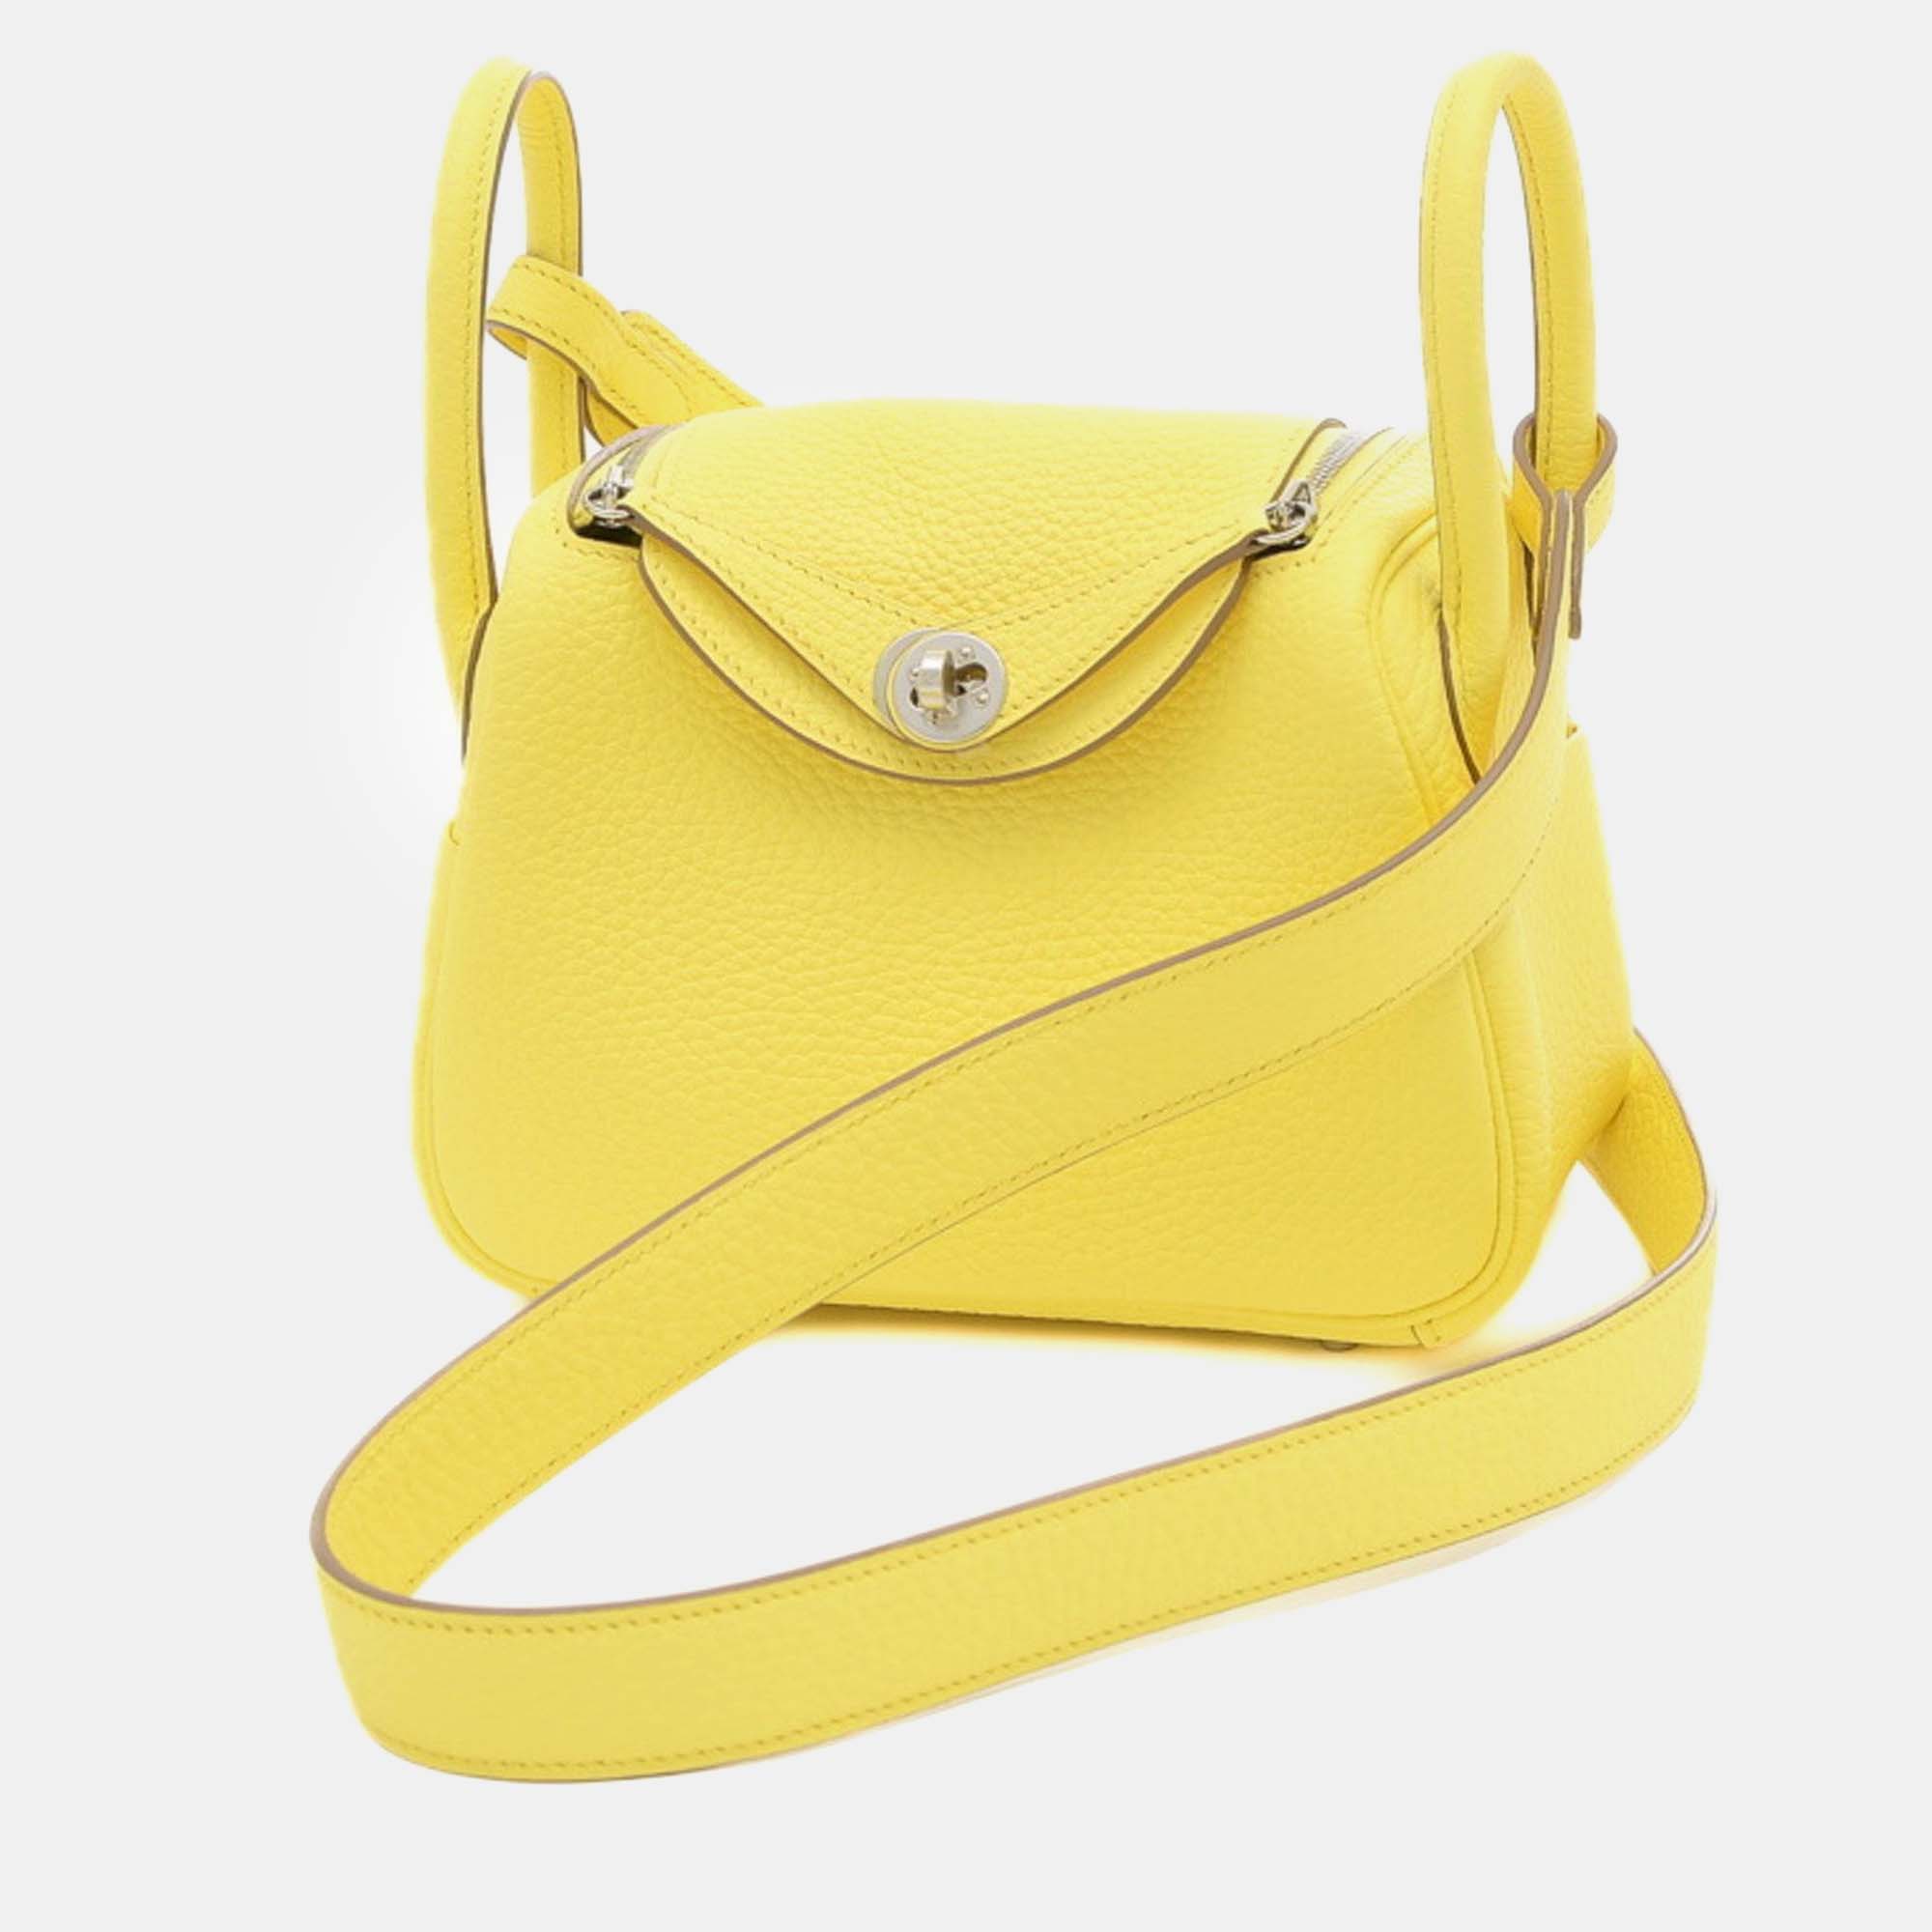 Hermes yellow taurillon clemence leather mini lindy shoulder bag